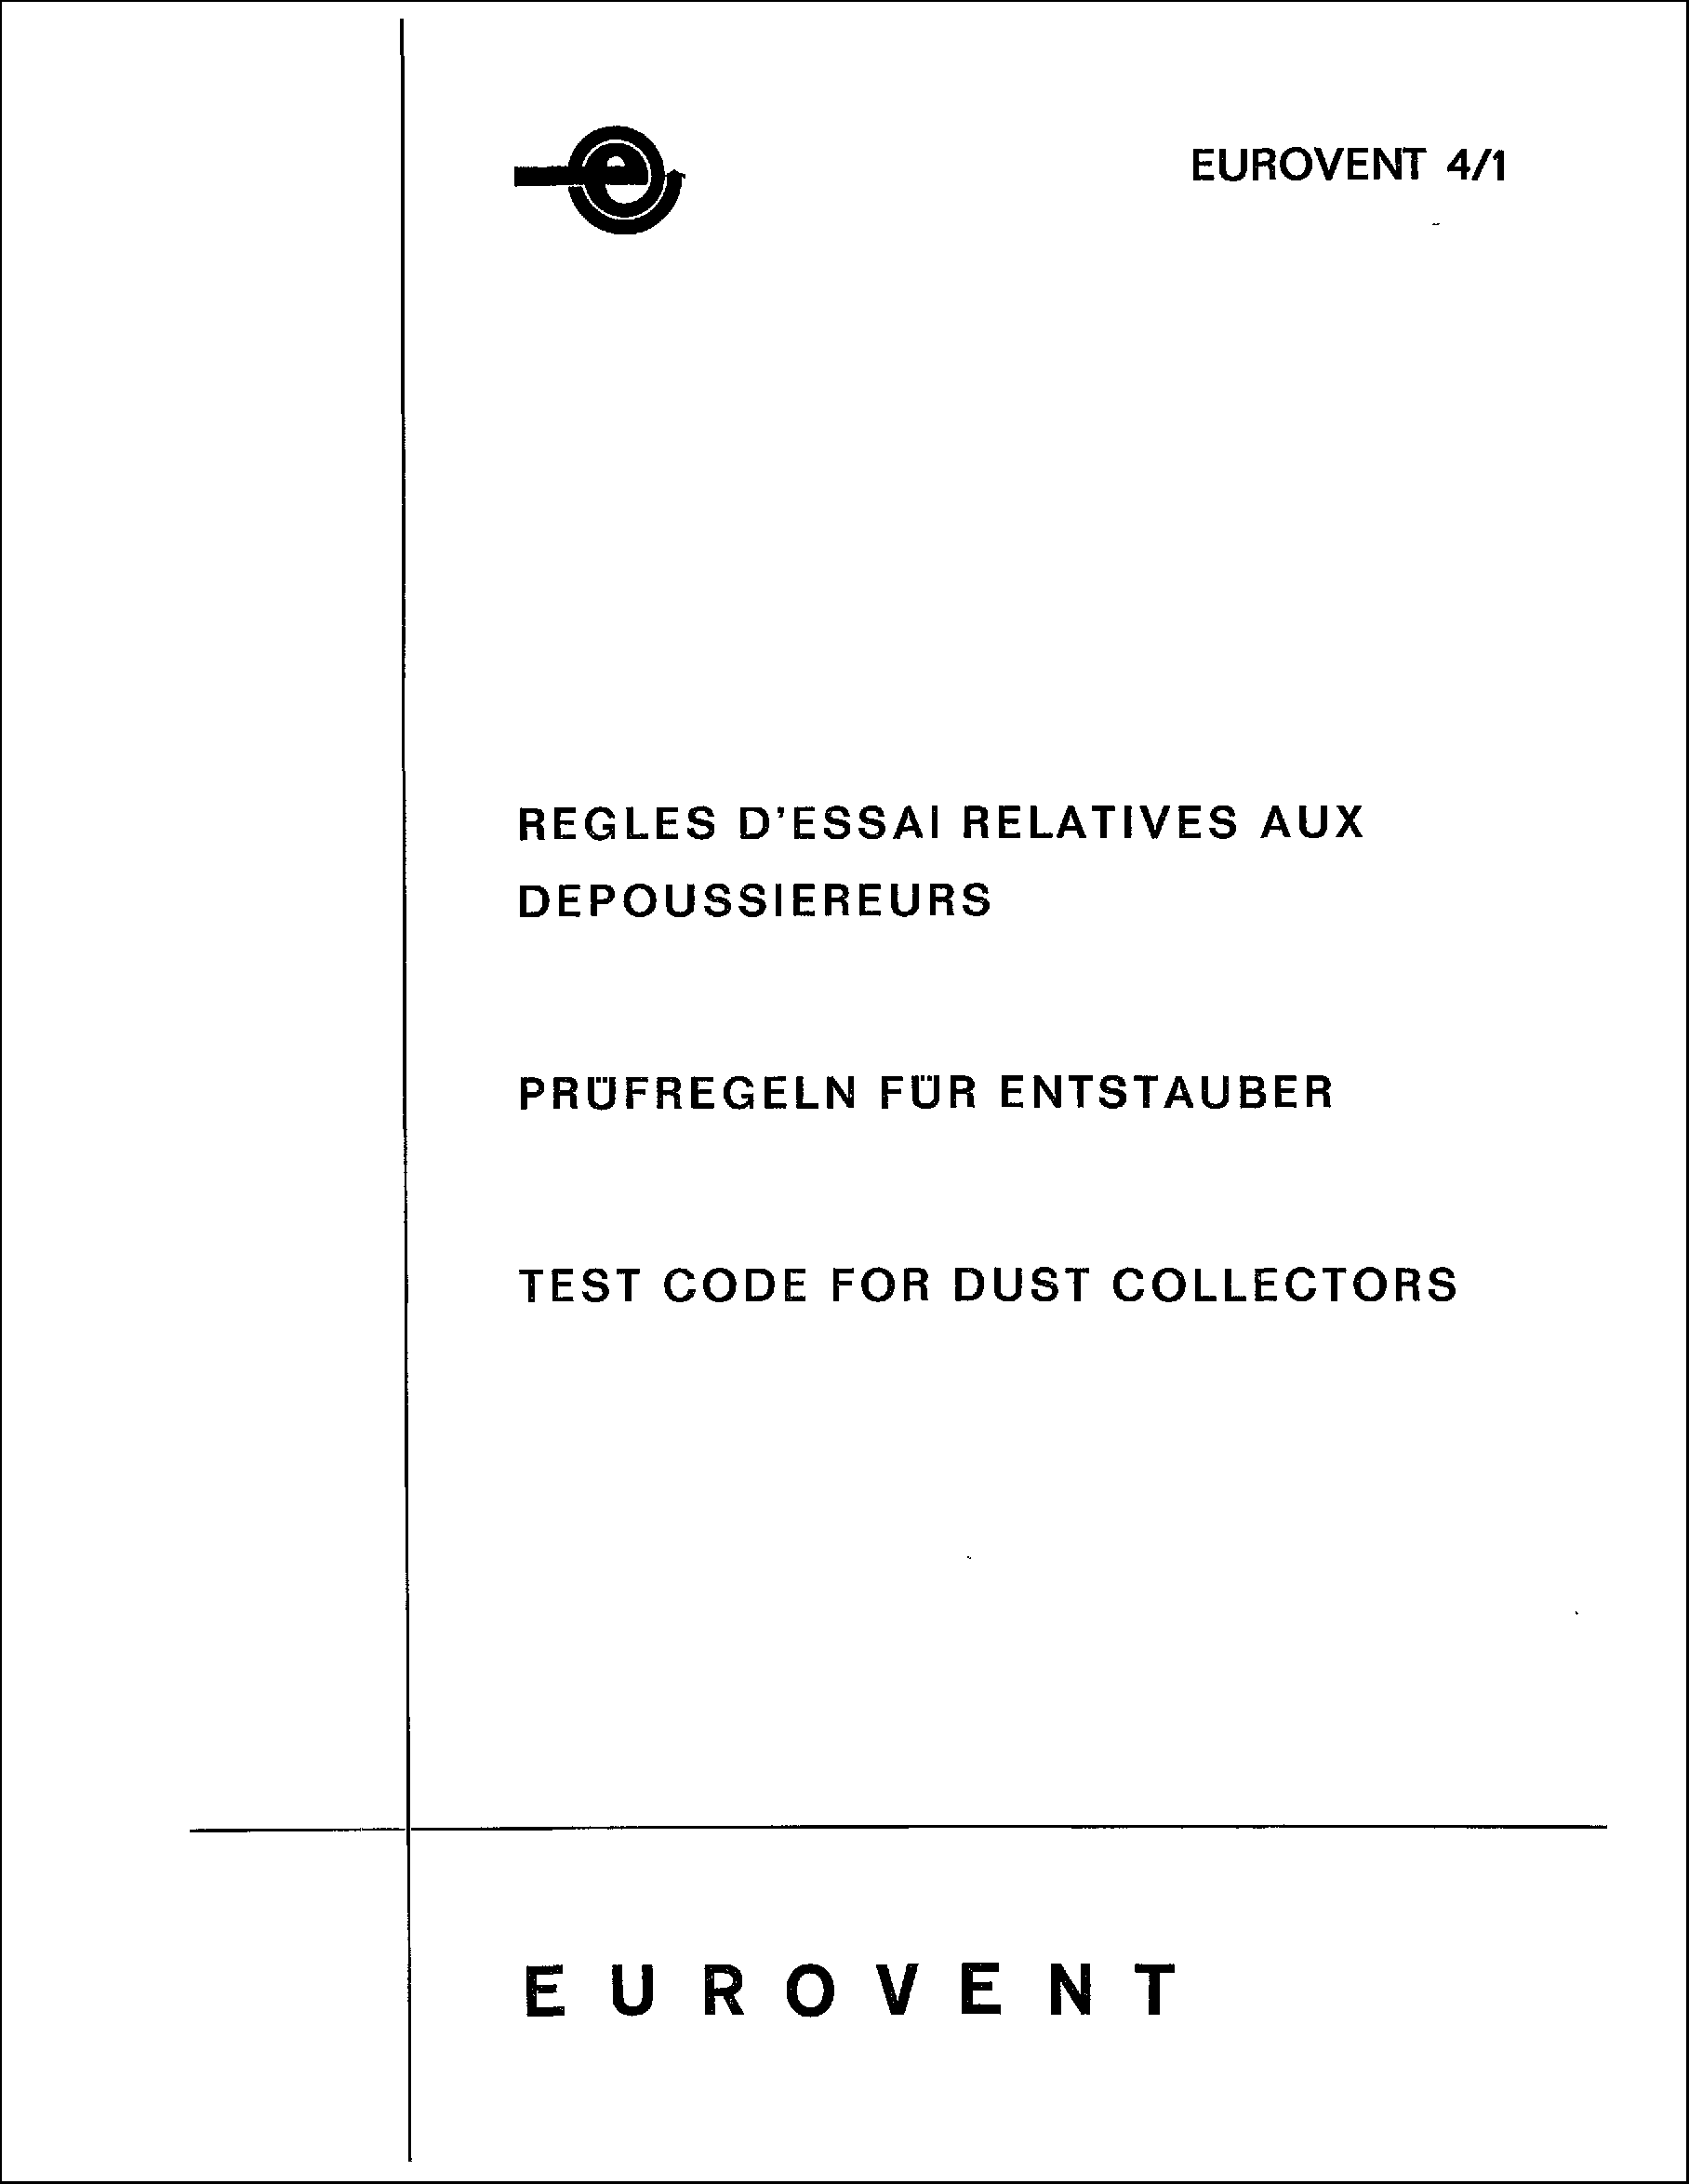 1986 - Test code for dust collectors